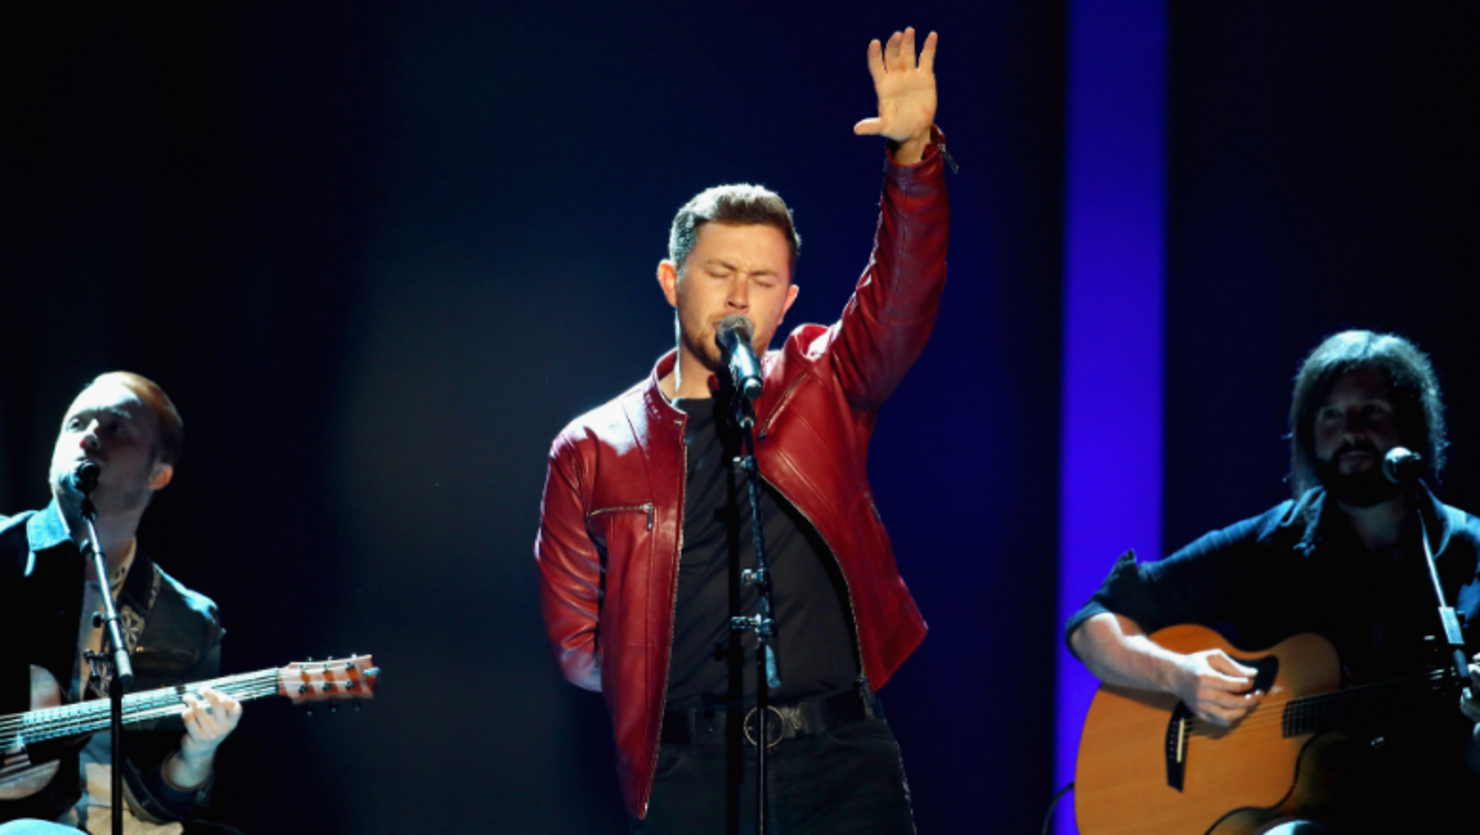 Scotty McCreery Dedicates 'Five More Minutes' To Charley Pride At The Opry